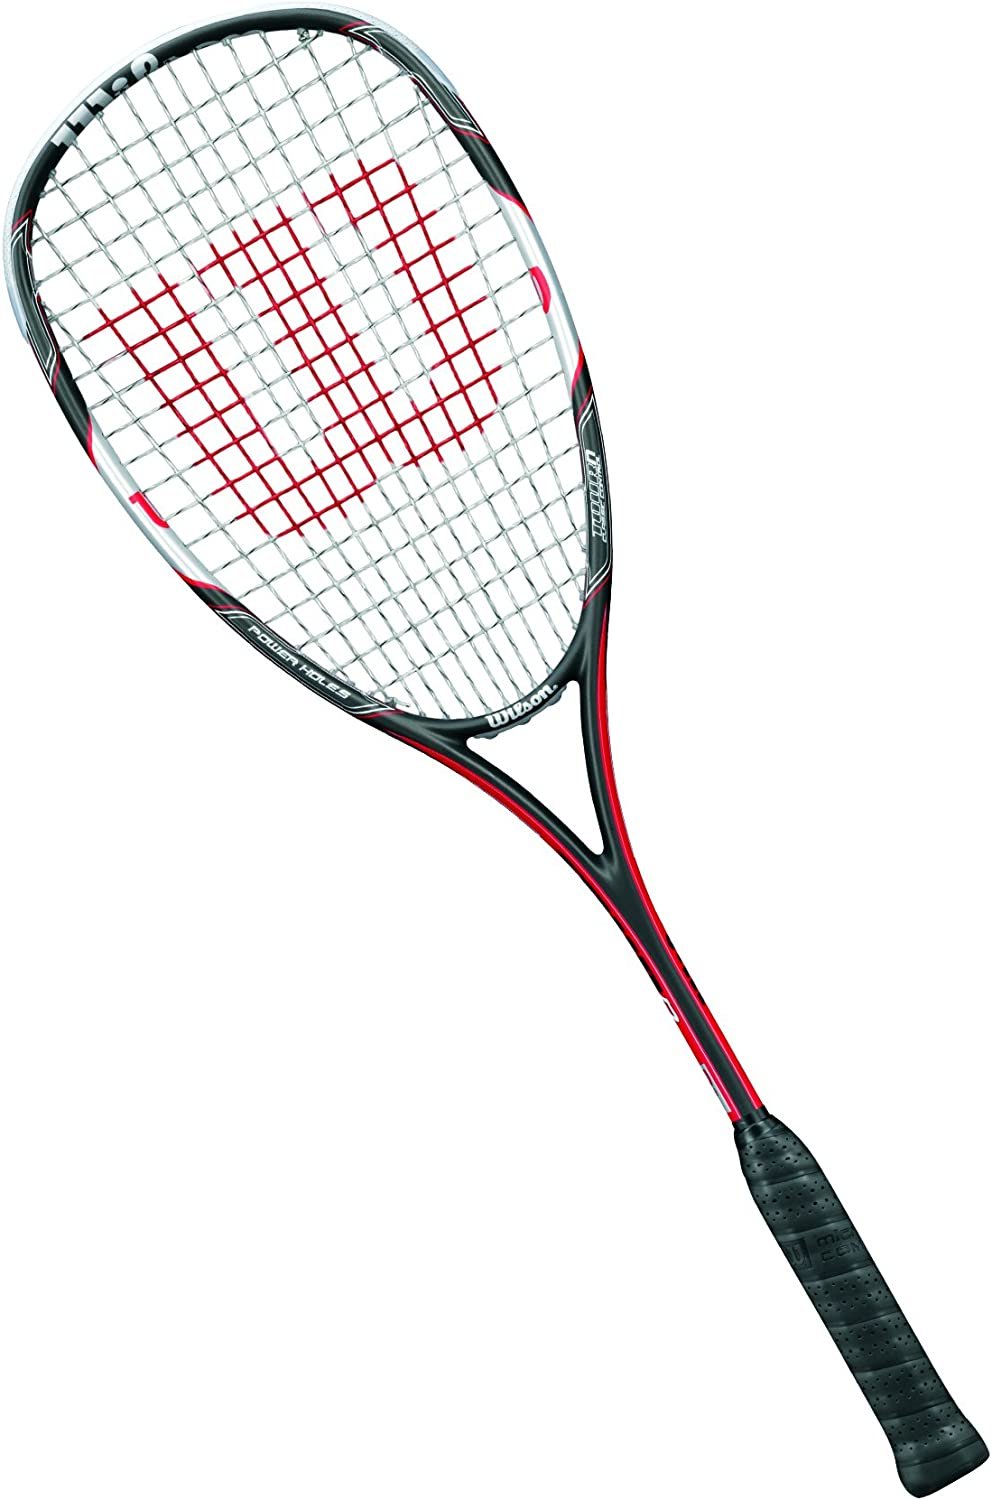 WILSON Tour N Squash Racket with 1/2 Cover